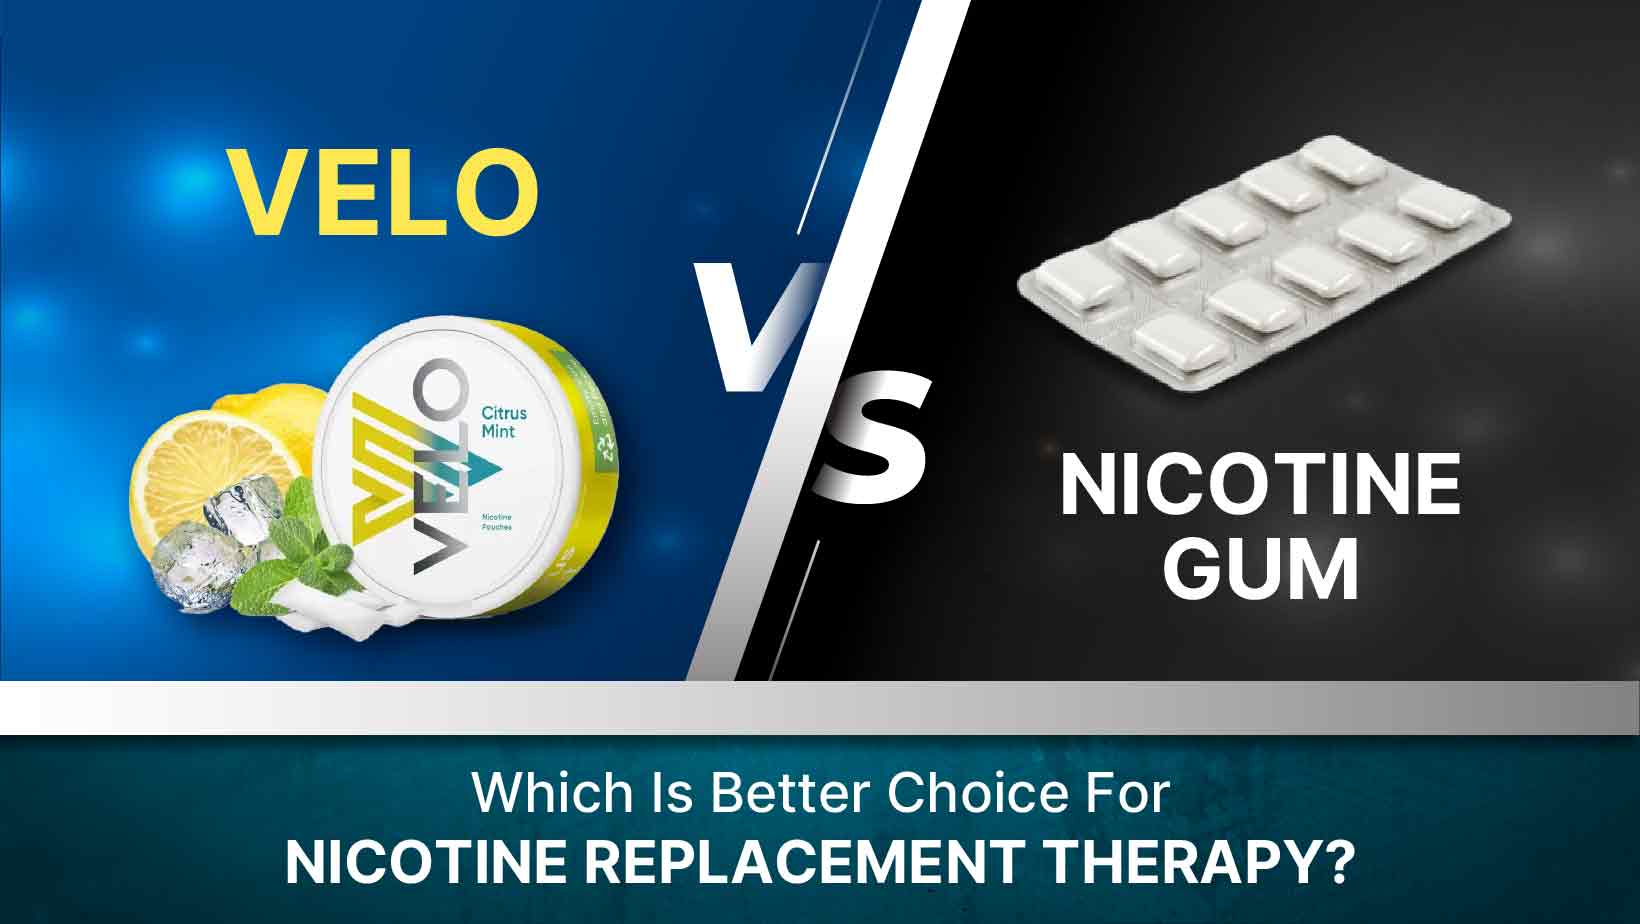 Velo V/S Nicotine Gum - Which Is A Better Choice For Nicotine Replacement Therapy?